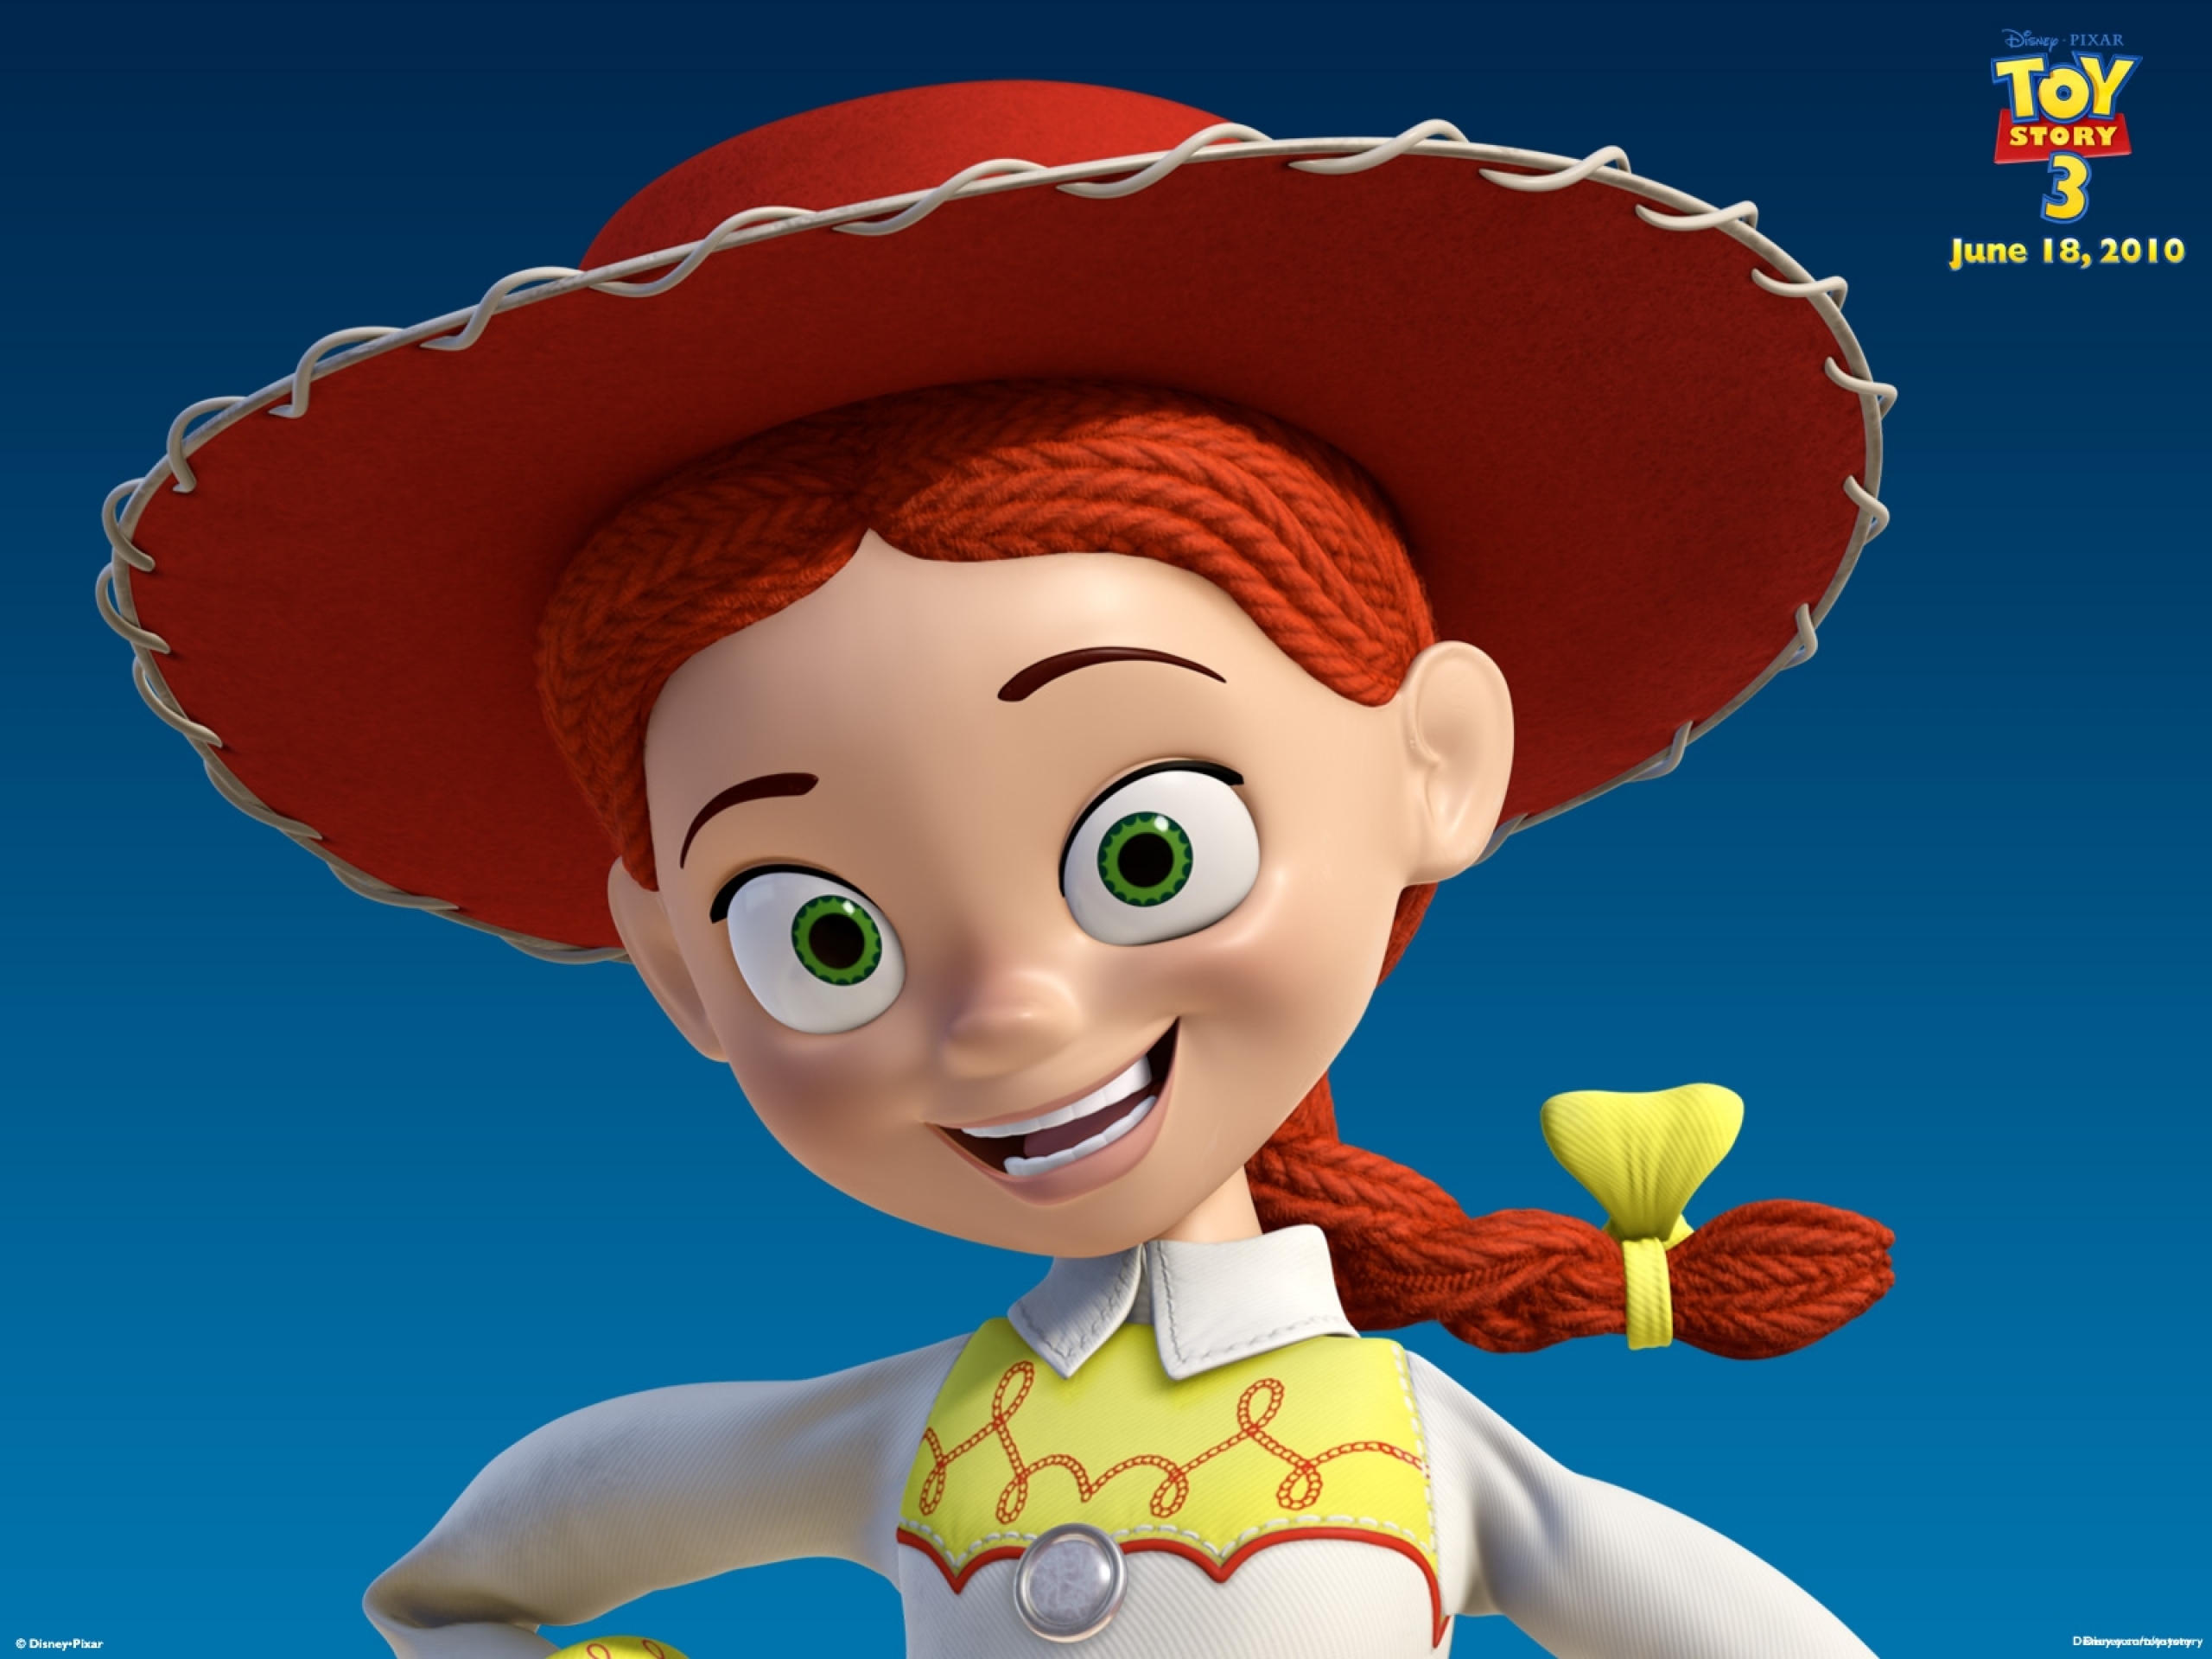  jessie toy story 1600x1200 wallpaper Wallpaper Free Wallpapers